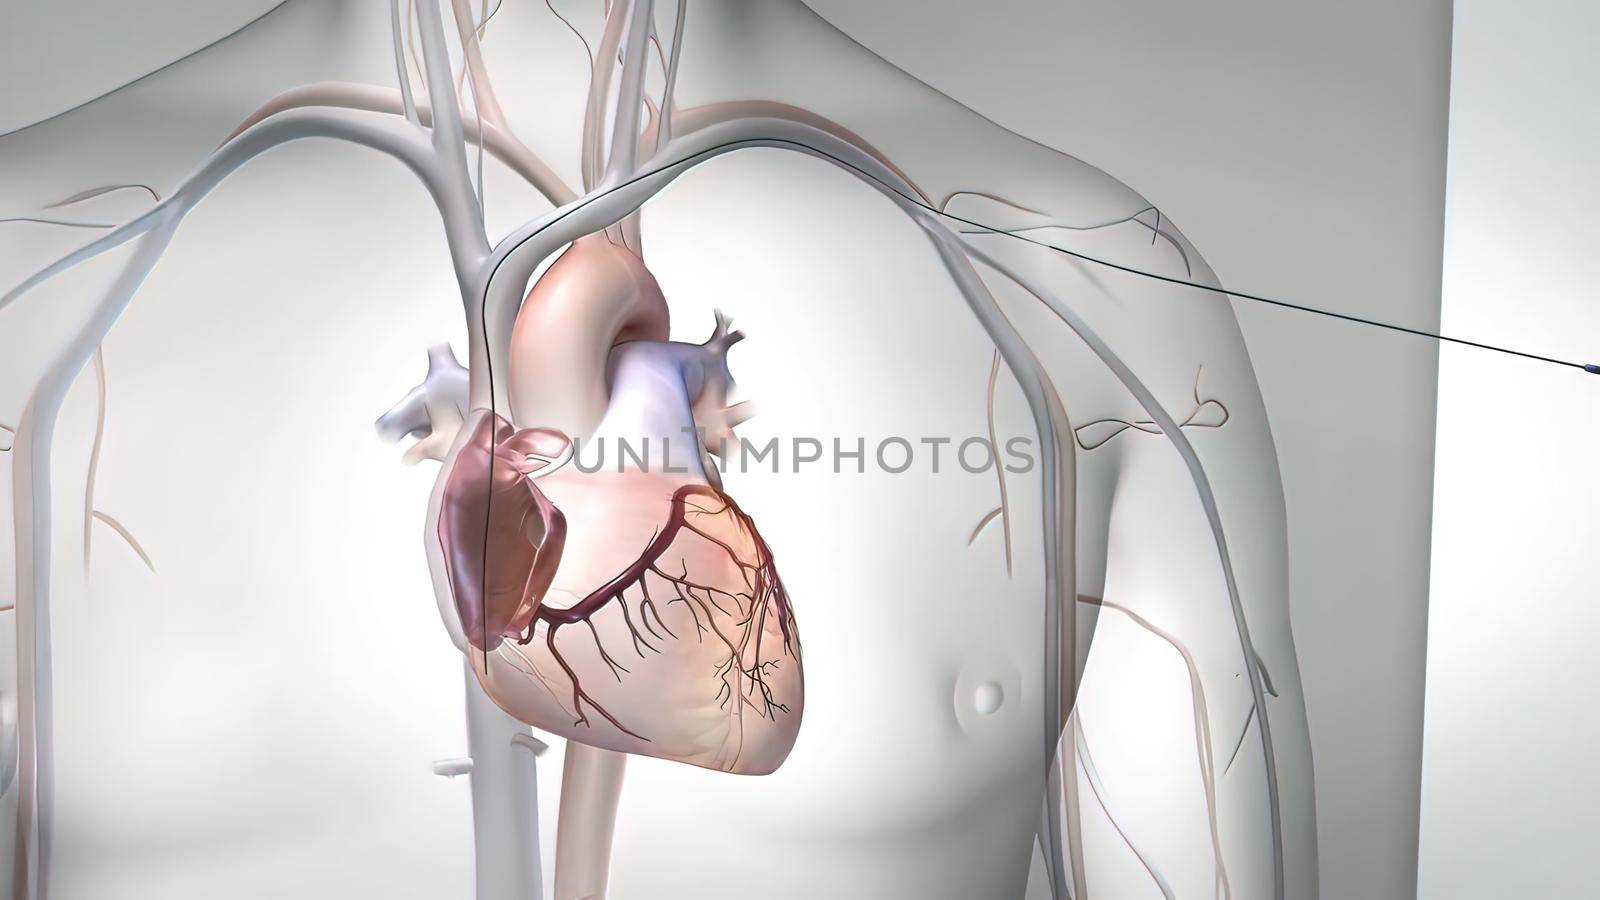 Coronary artery bypass grafting (CABG) is a type of surgery that improves blood flow to the heart. Its used for people who have severe coronary heart disease.3D illustration